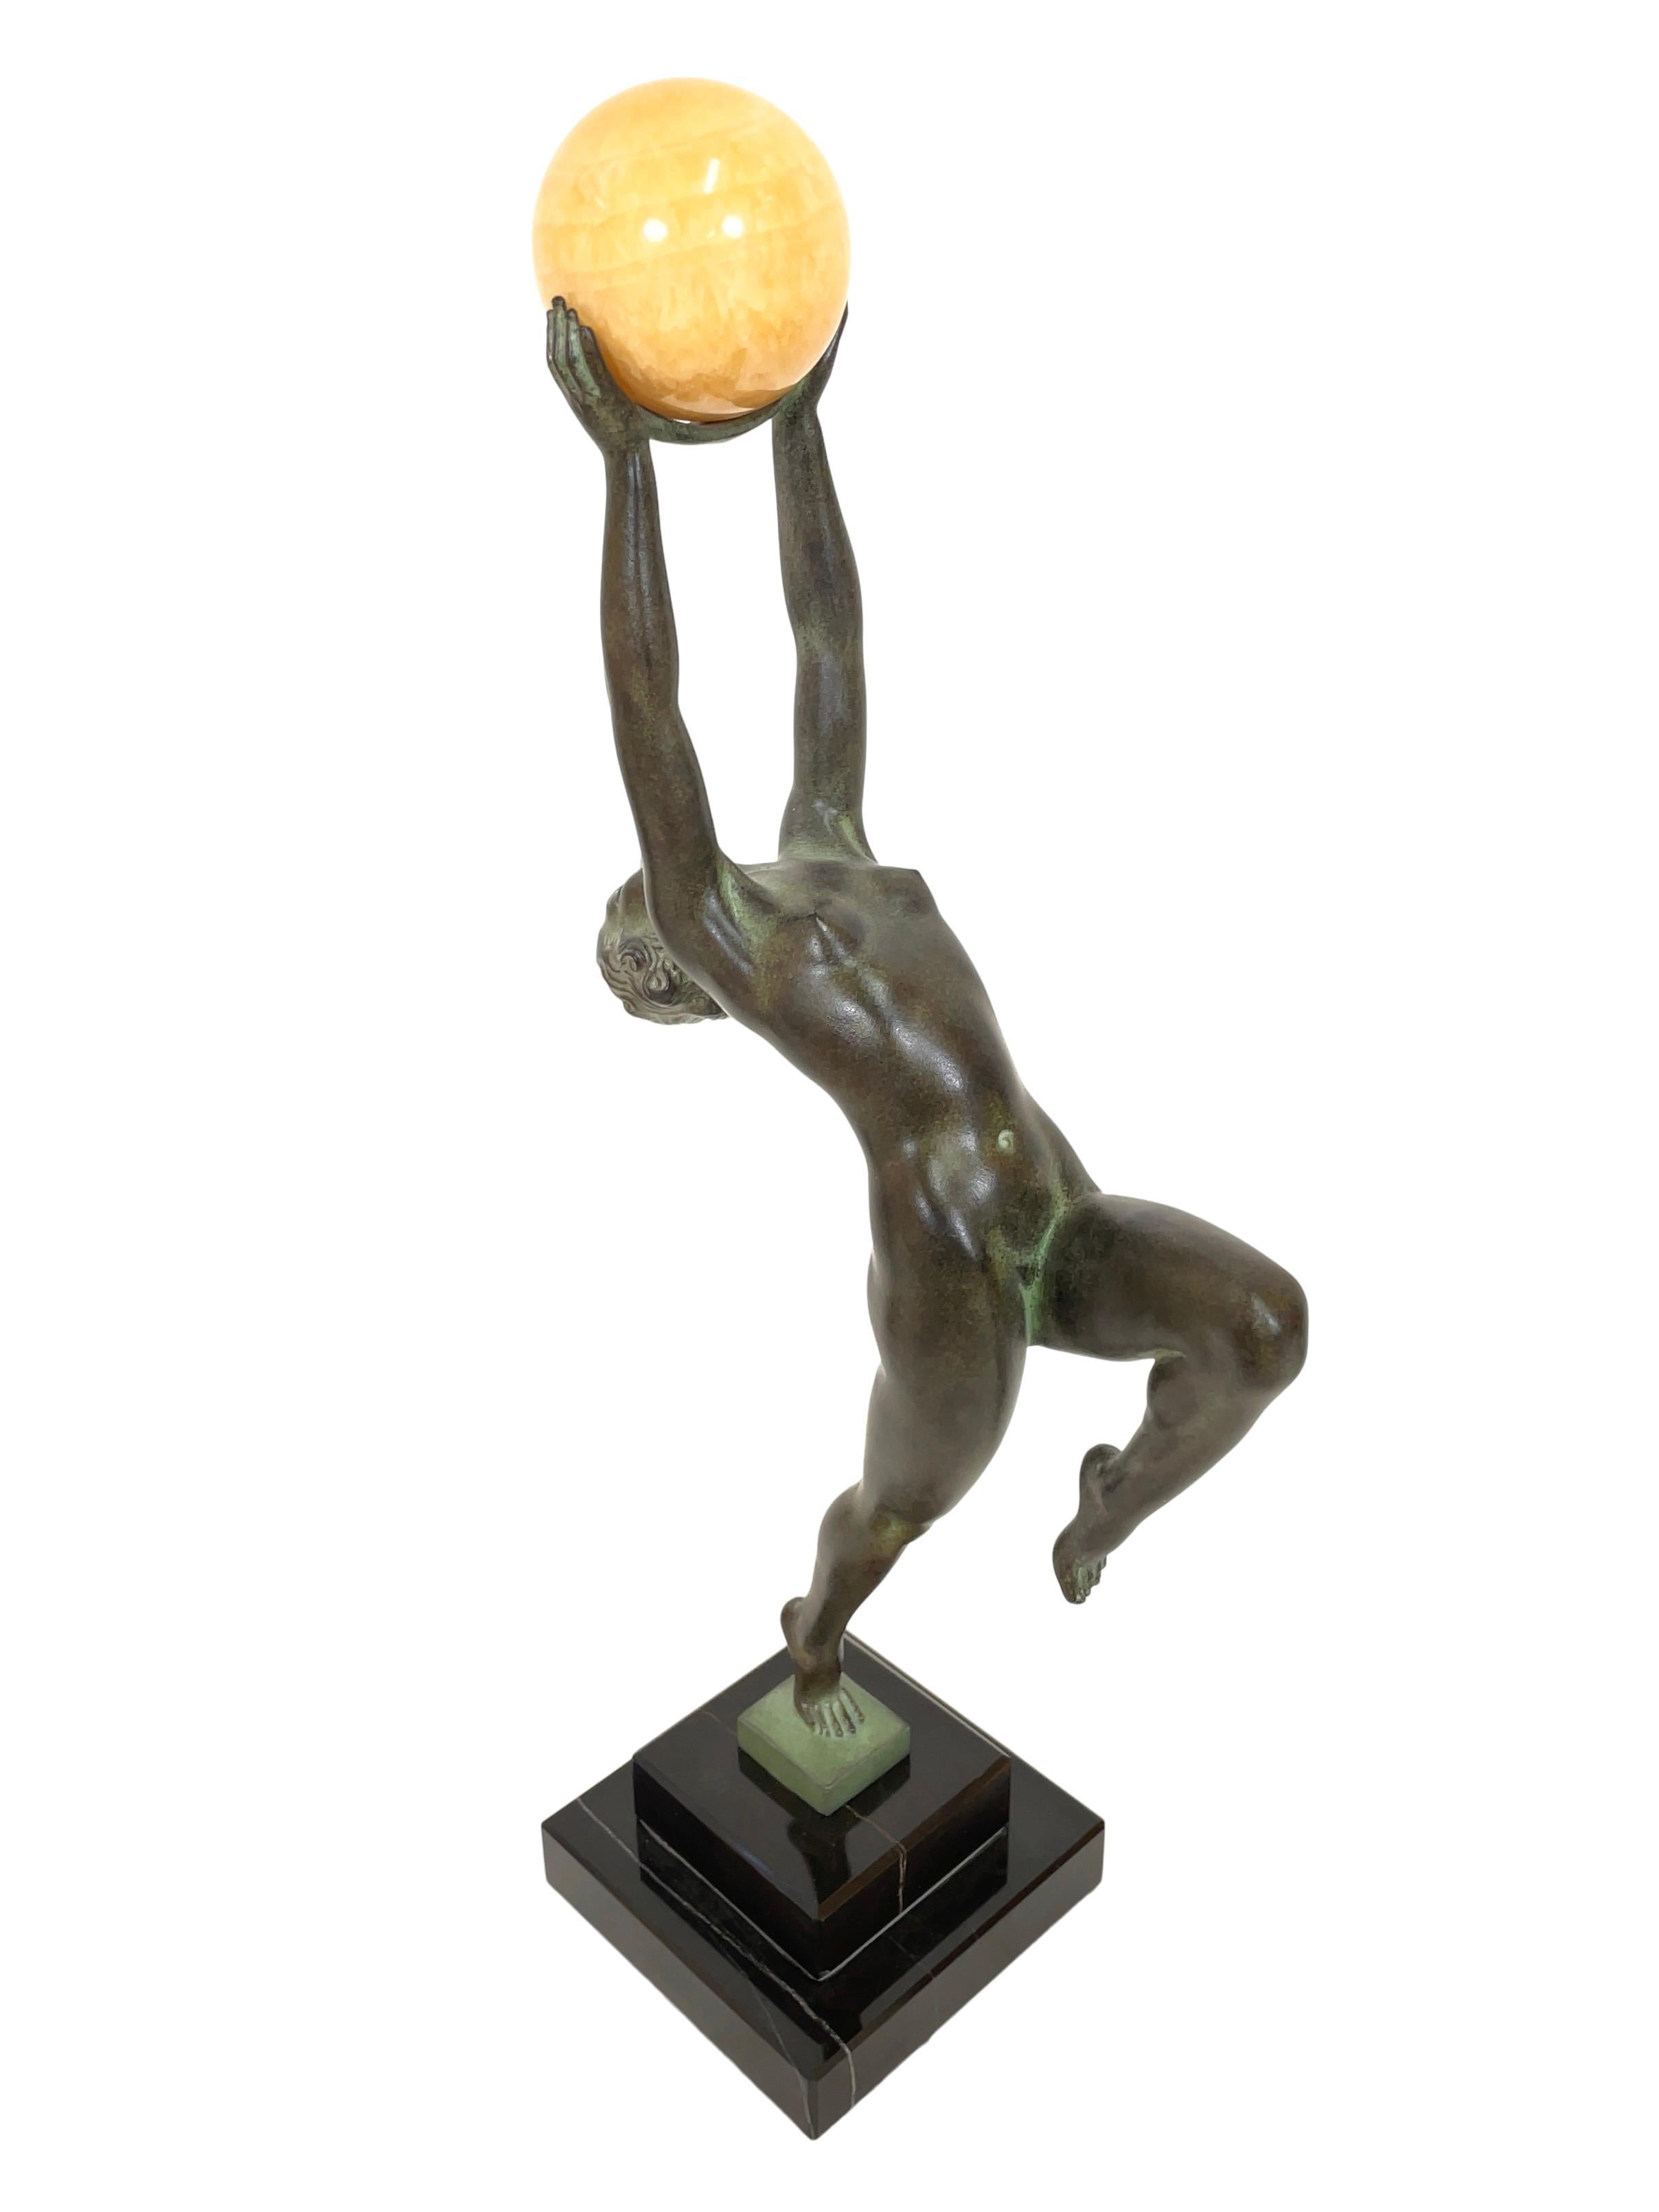 French Jeu Sculpture in Spelter with an Onyx Ball from Max Le Verrier in Art Deco Style